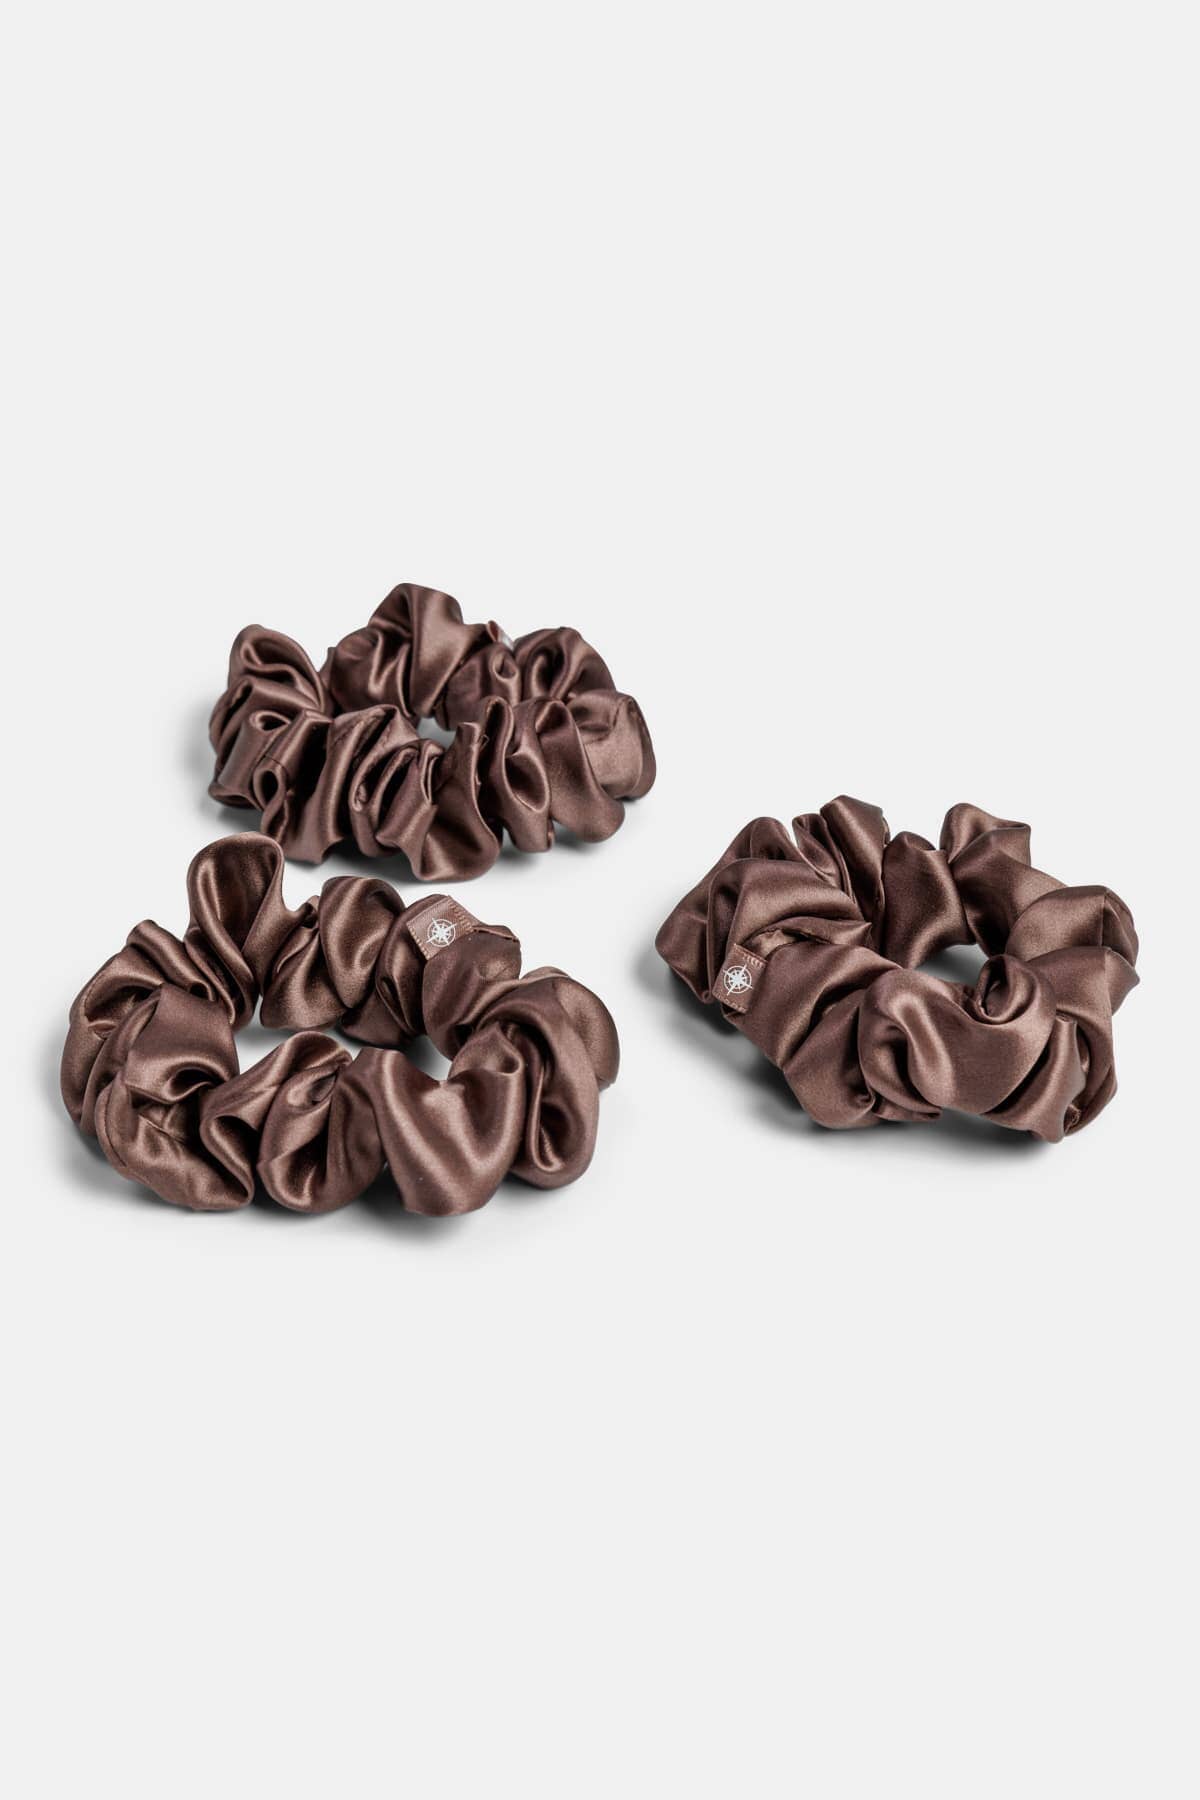 100% Pure Mulberry Silk Hair Scrunchies with Gift Box - Set of 3 Large Hair Ties Womens>Beauty>Hair Care Fishers Finery Chocolate 